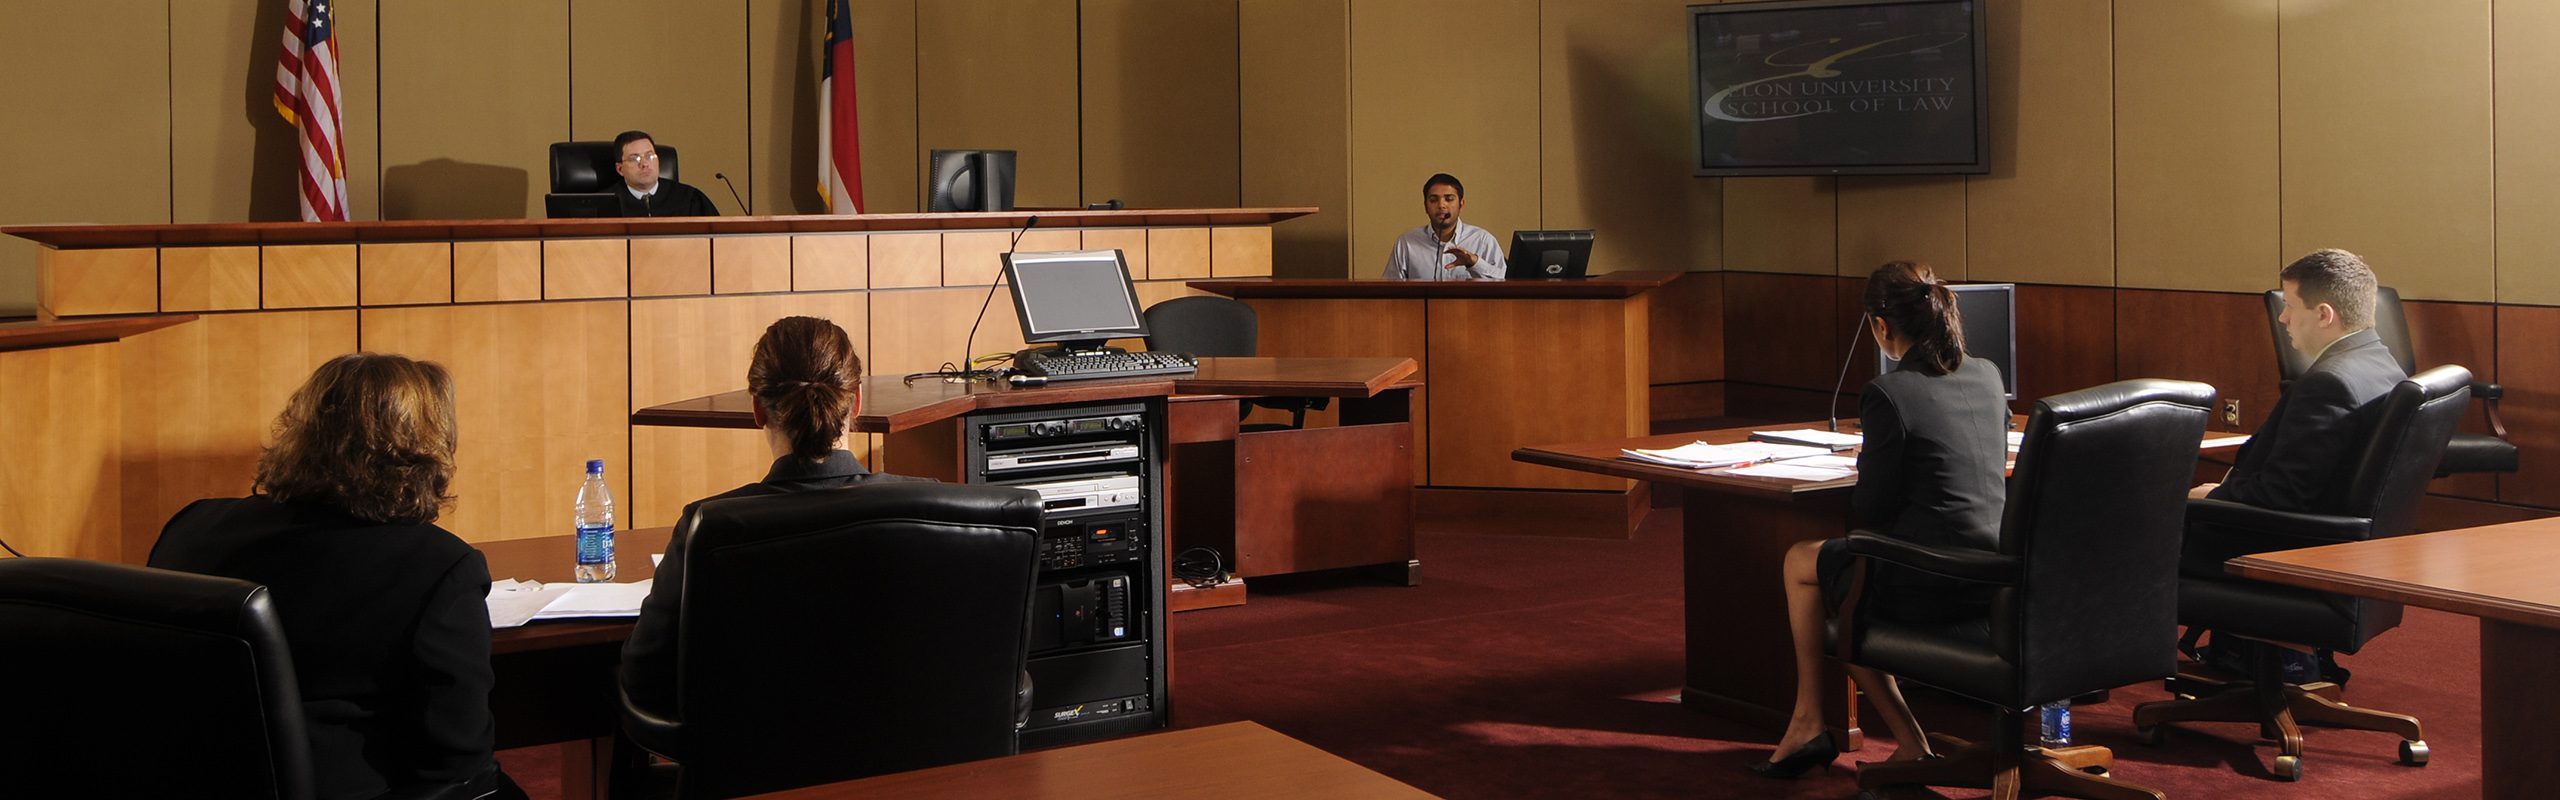 Second-year Elon Law School students participate in a Trial Practice and Procedure final as they argue a case before a local judge in the school's Business courtroom.